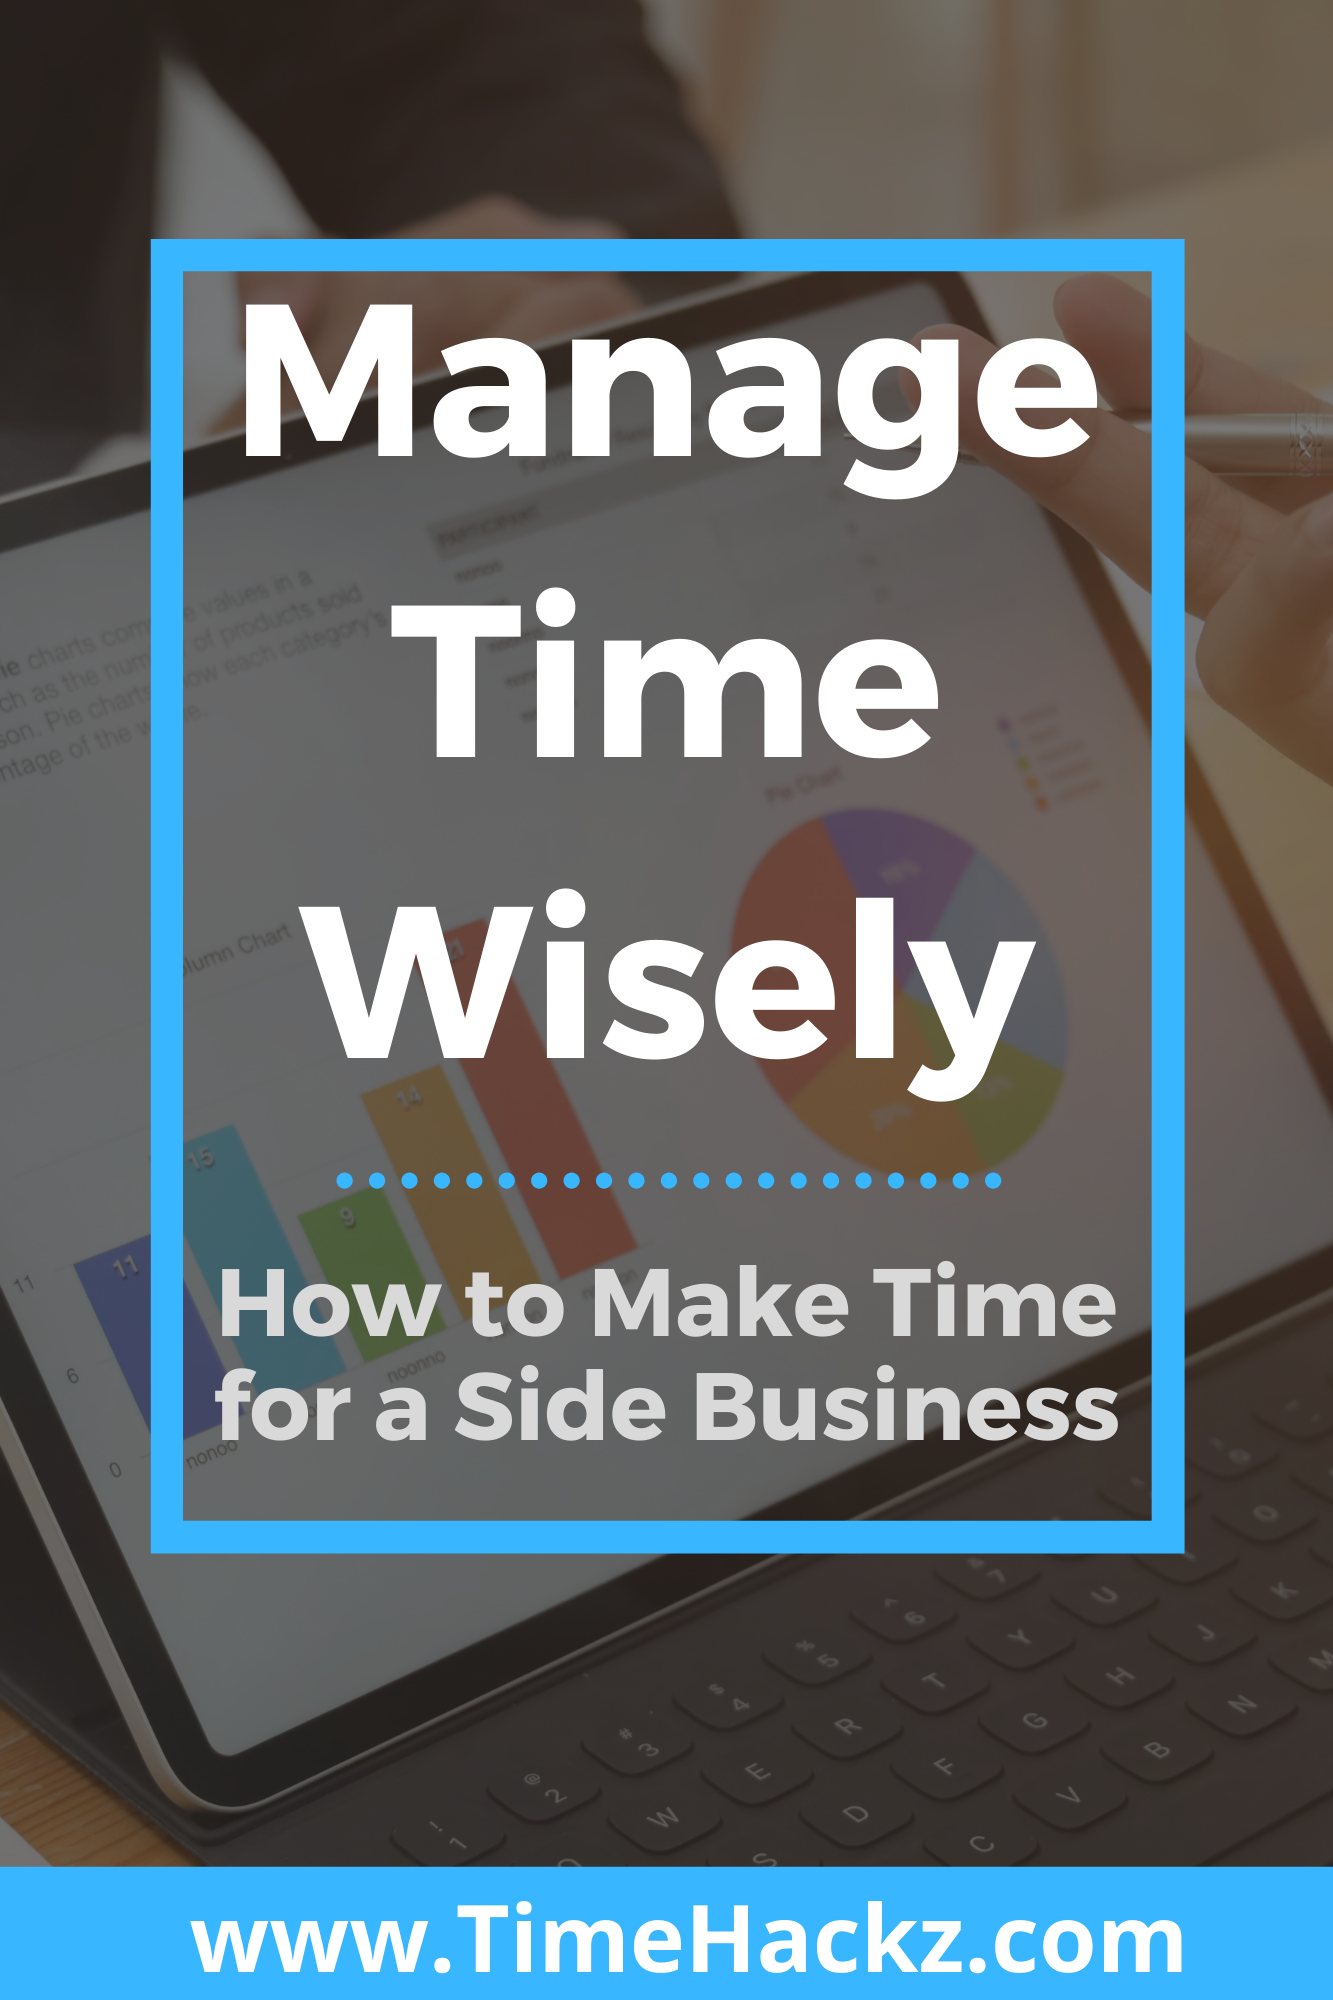 Manage time wisely